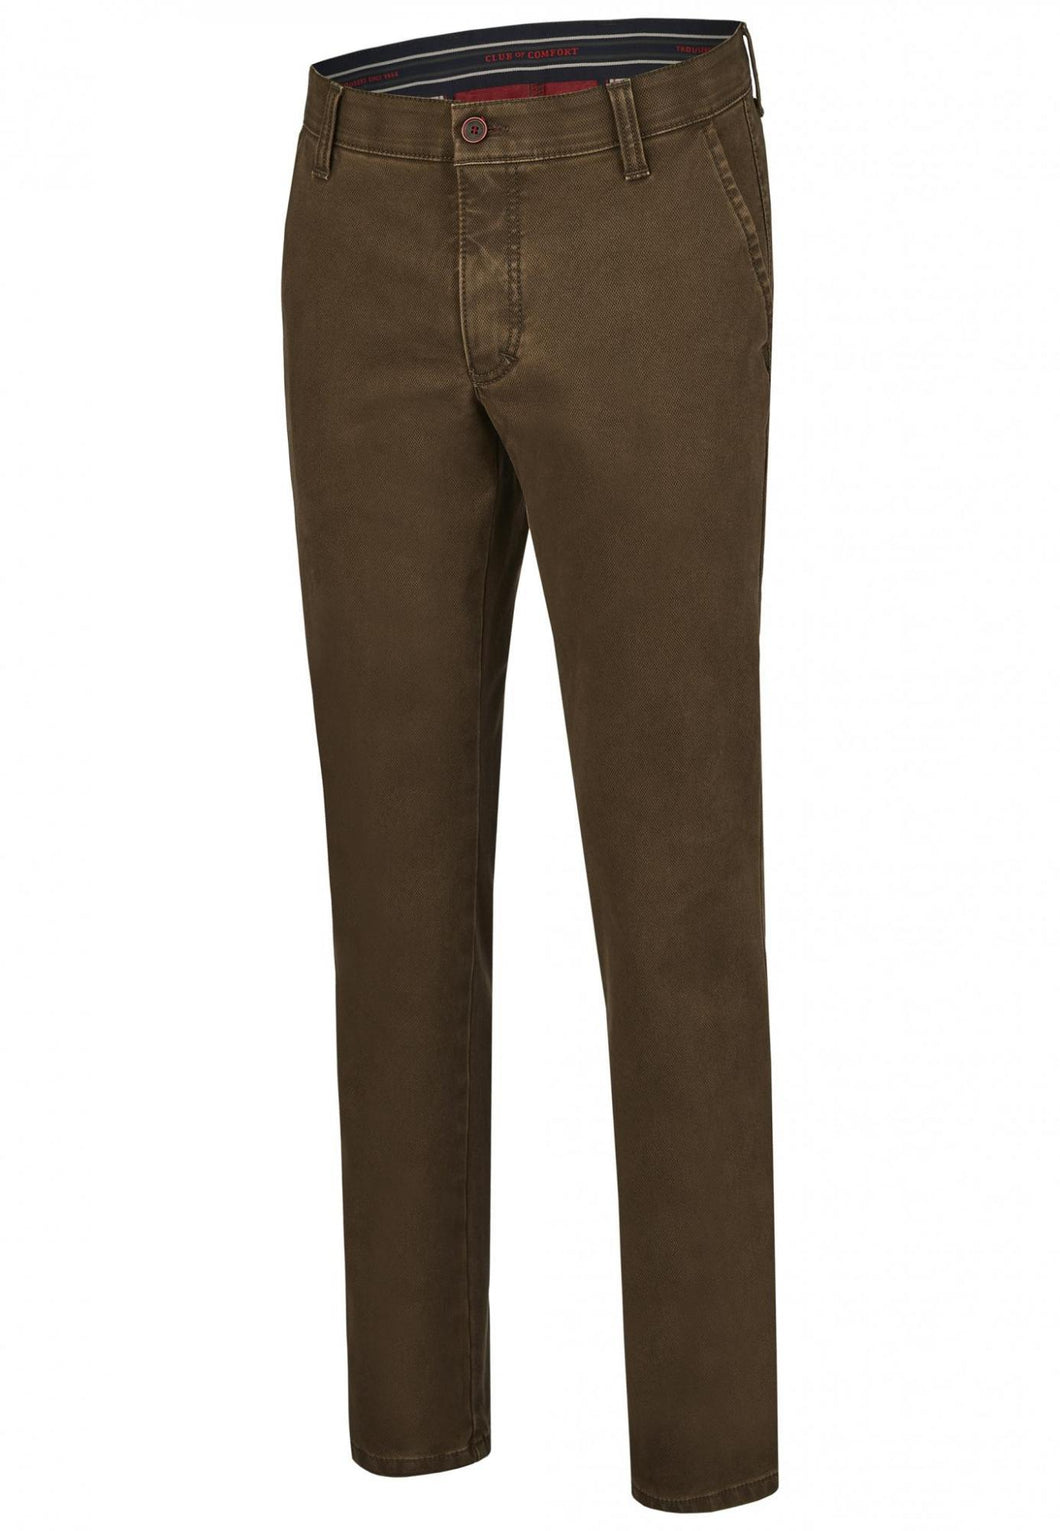 Club Of Comfort brown thermal lined cotton trousers